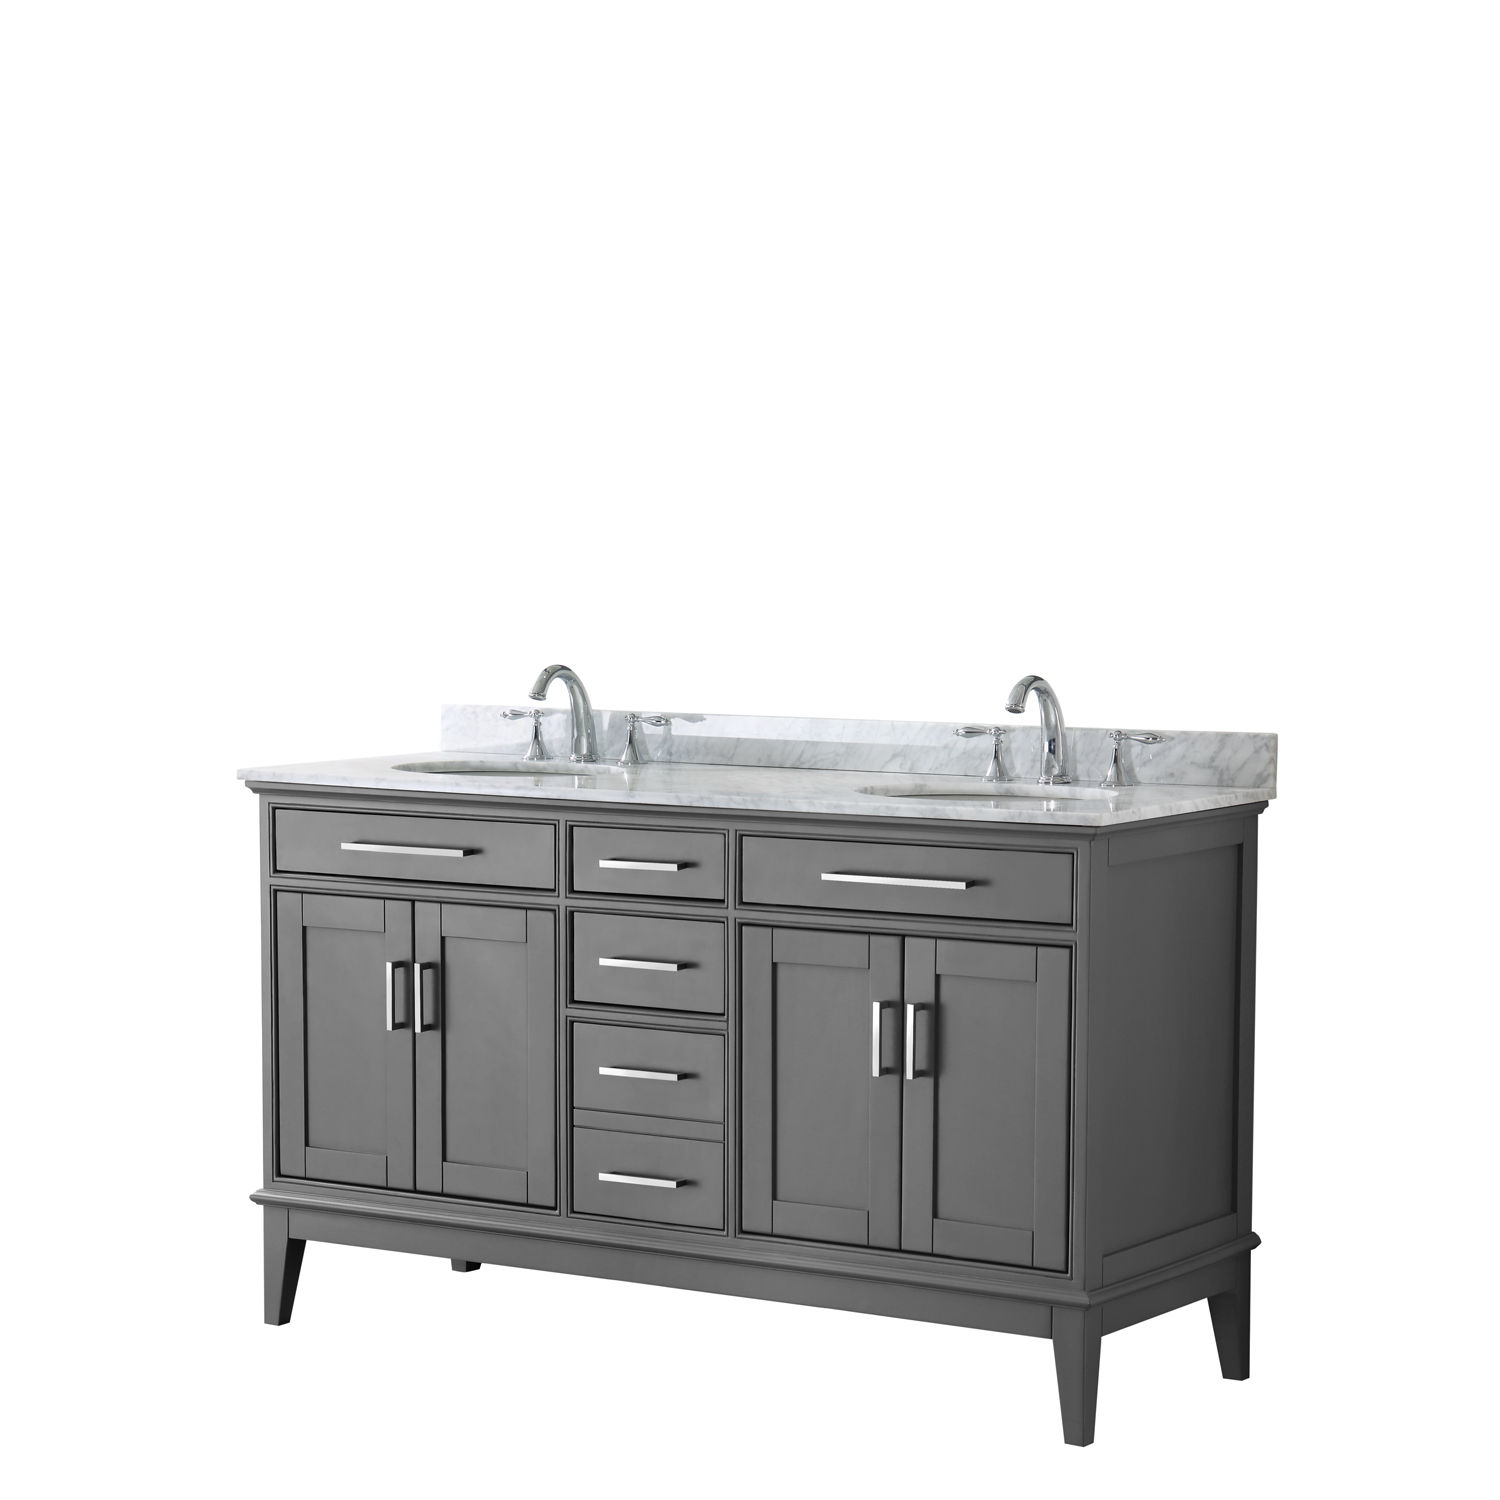 Contemporary 60" Double Bathroom Vanity in Dark Gray, White Carrara Marble Countertop with Undermount Sinks, and Mirror Options